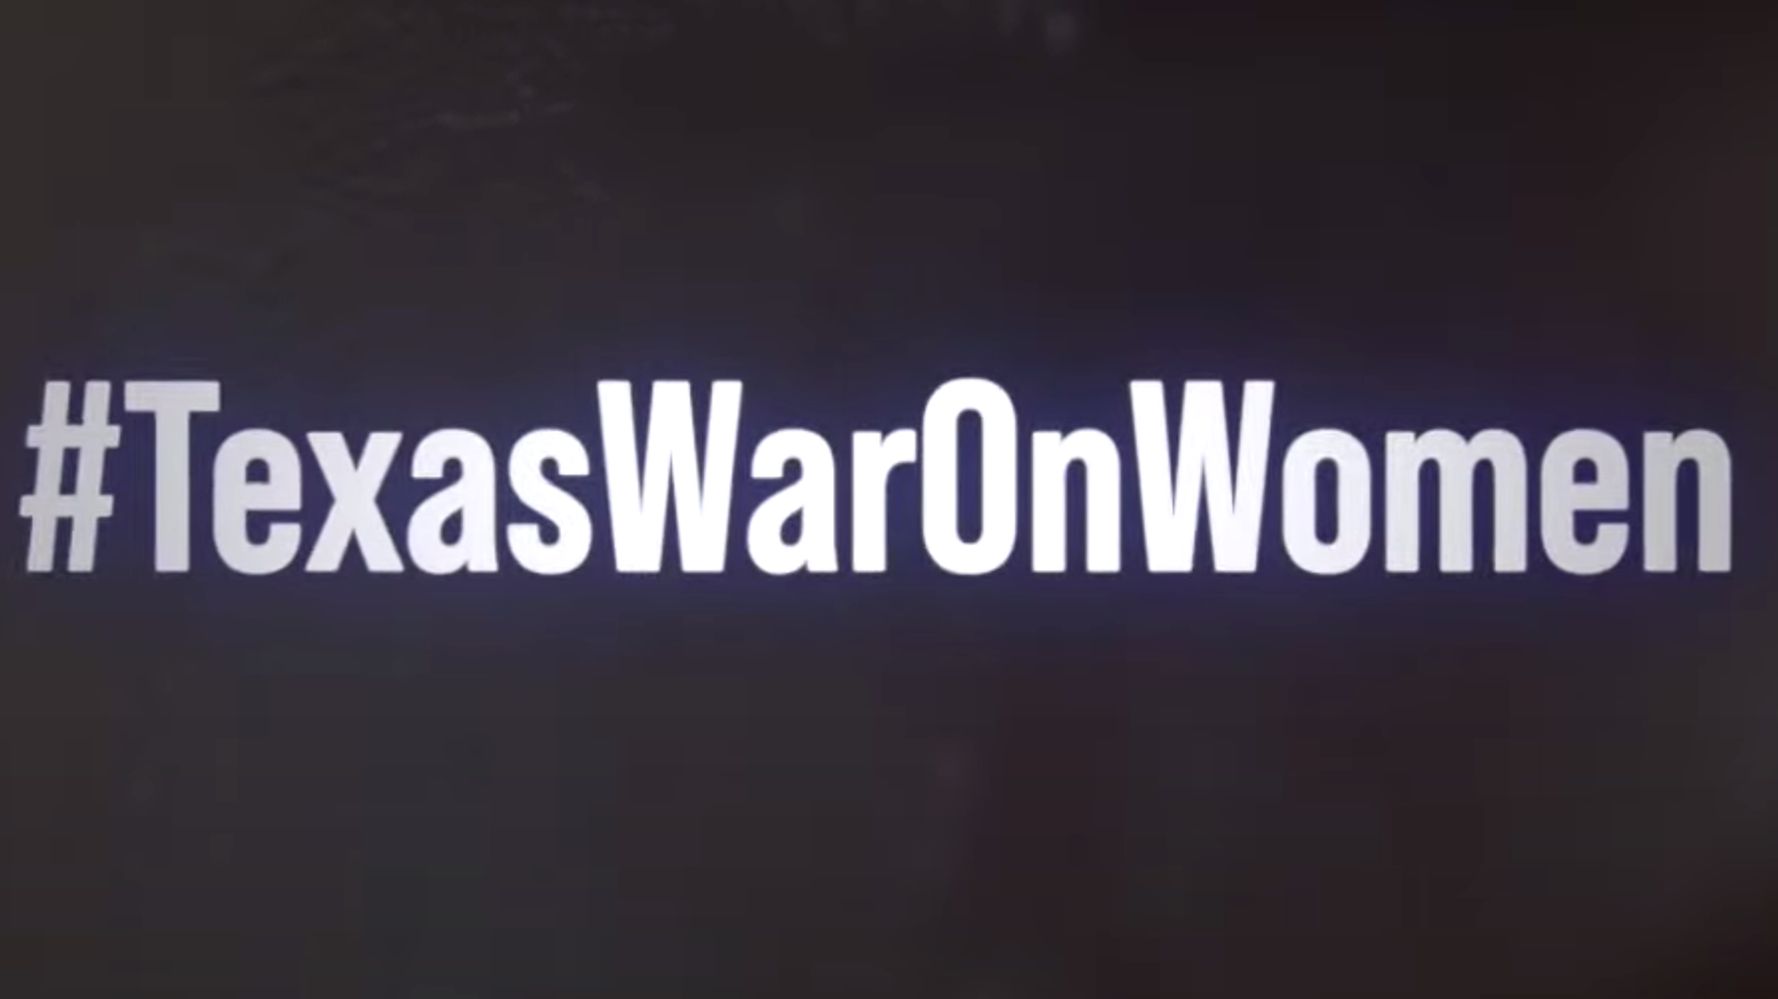 Bestselling Author Slams Texas’ ‘War Against Women’ In Damning New Video